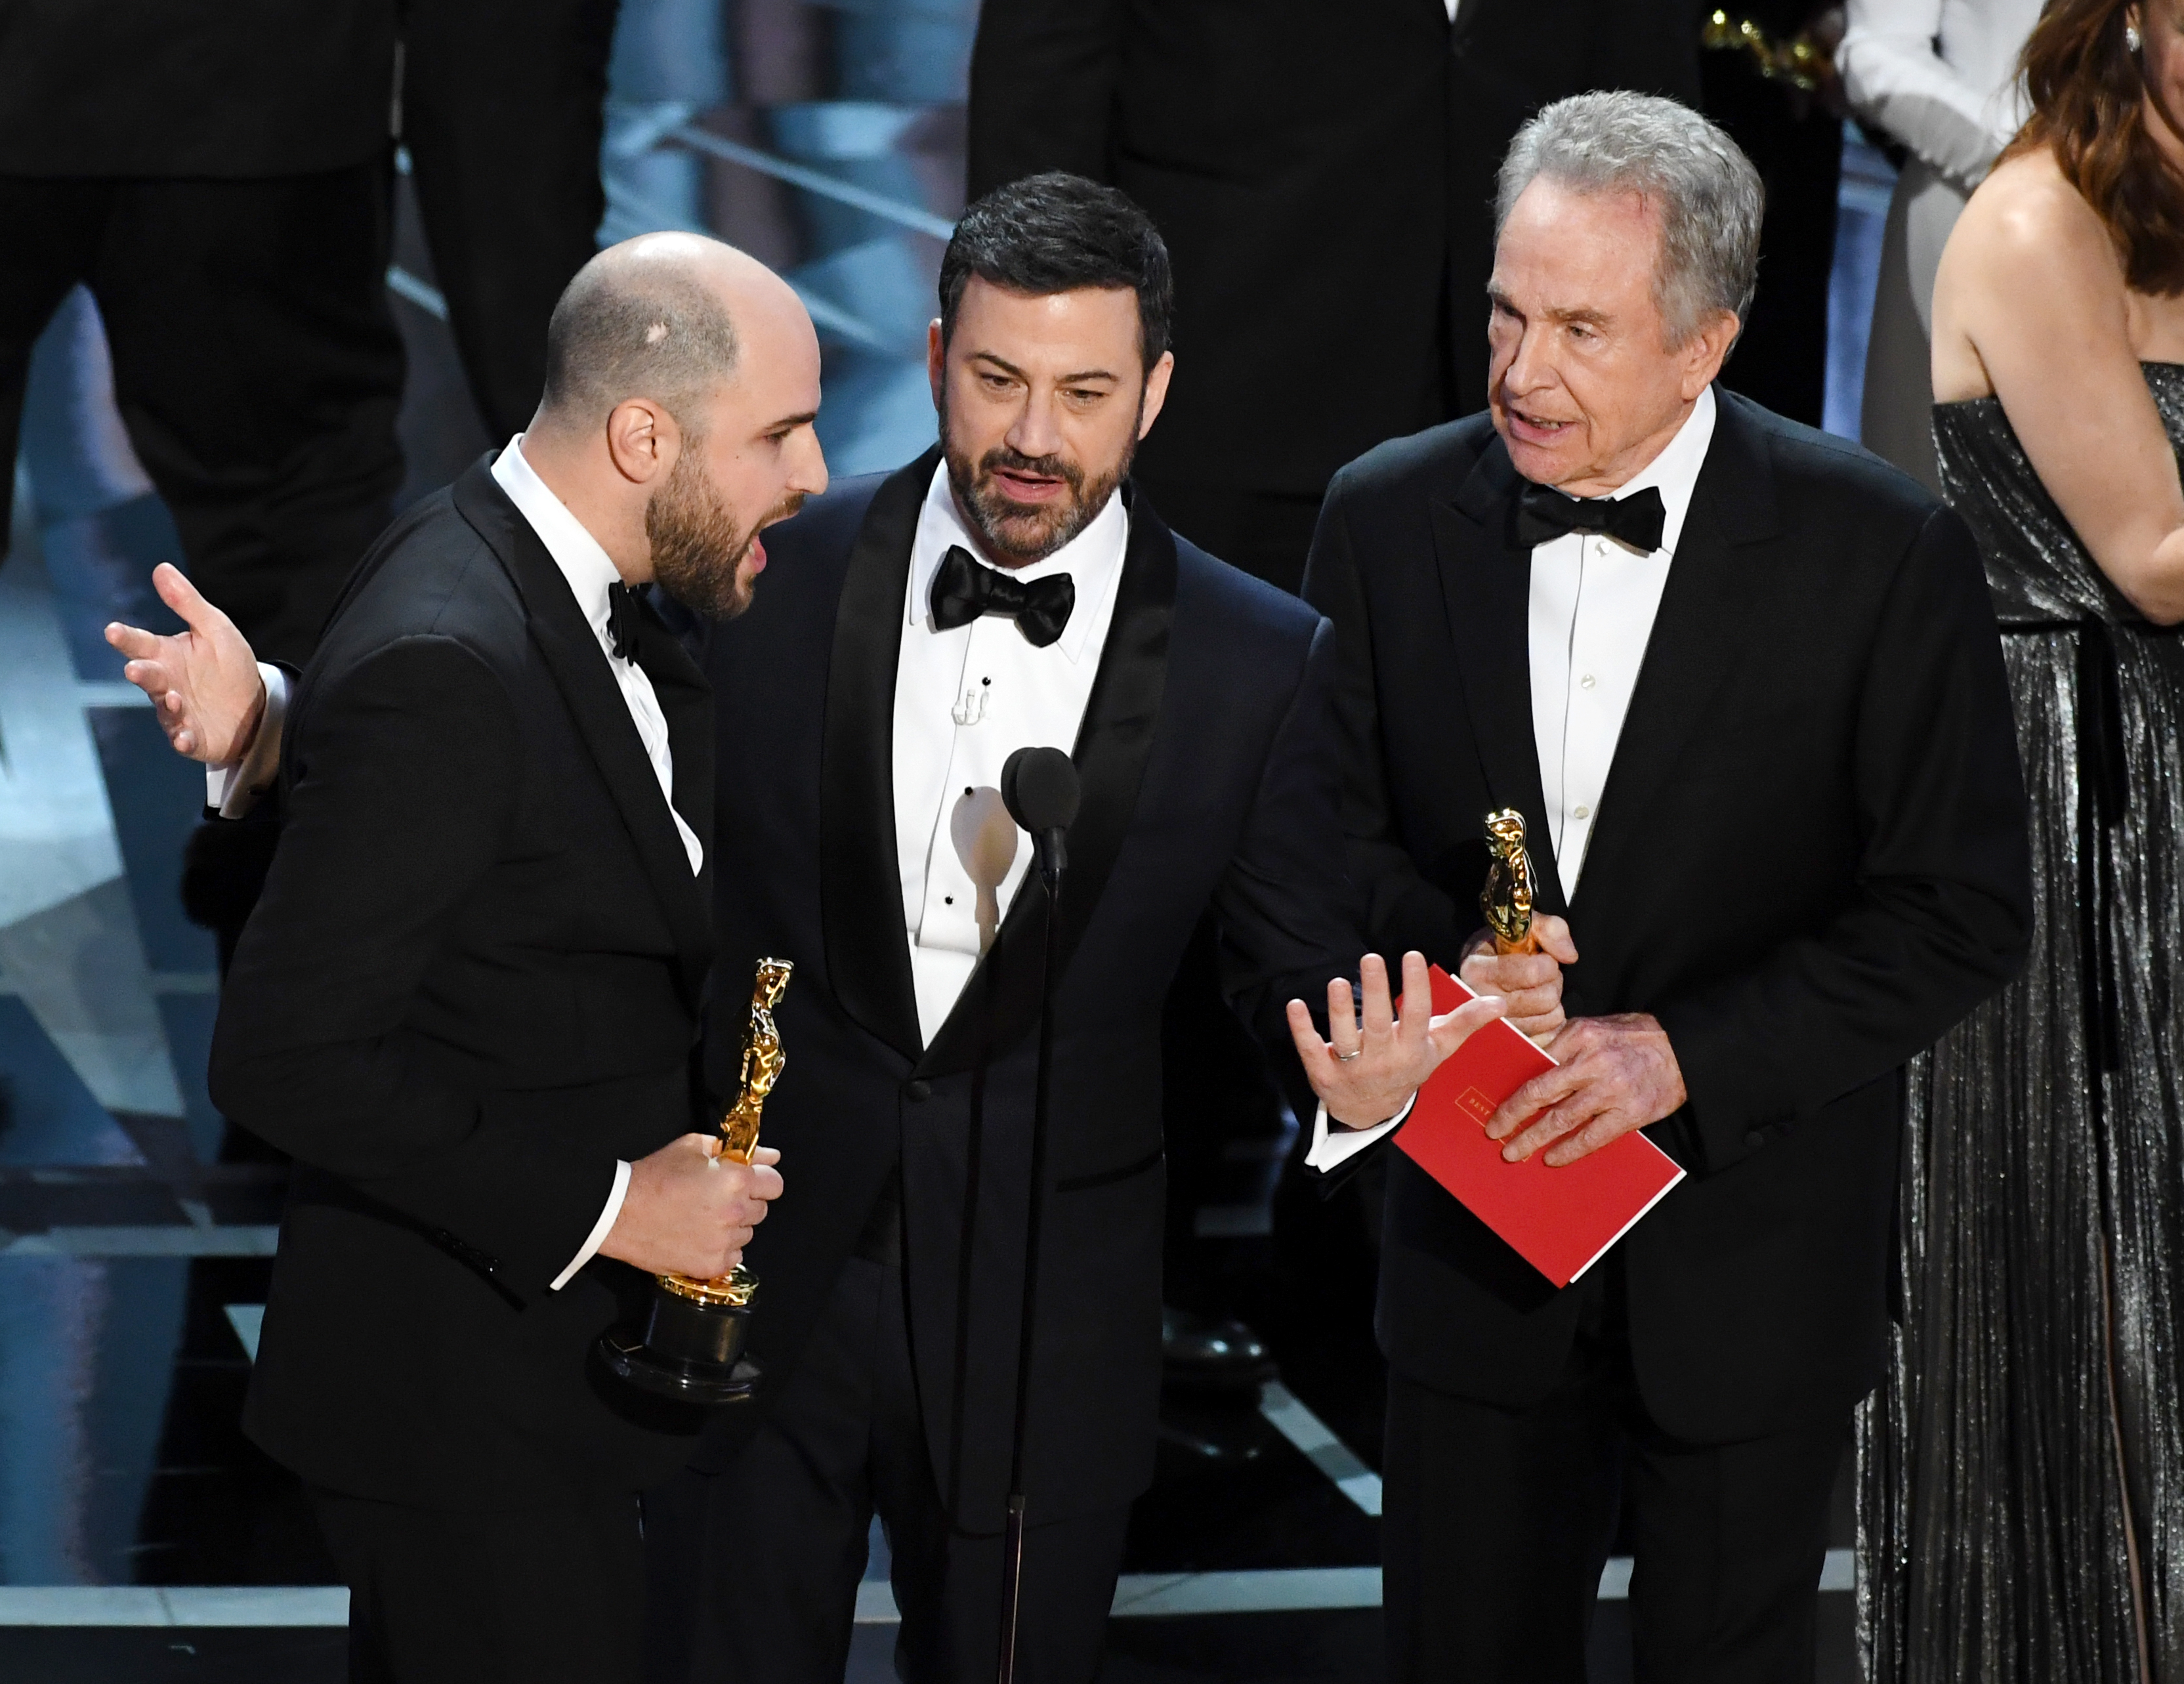 'La La Land' producer Jordan Horowitz (L) announces actual Best Picture winner as 'Moonlight' after a presentation error with host Jimmy Kimmel and actor Warren Beatty onstage during the 89th Annual Academy Awards on February 26, 2017 in Hollywood, California.